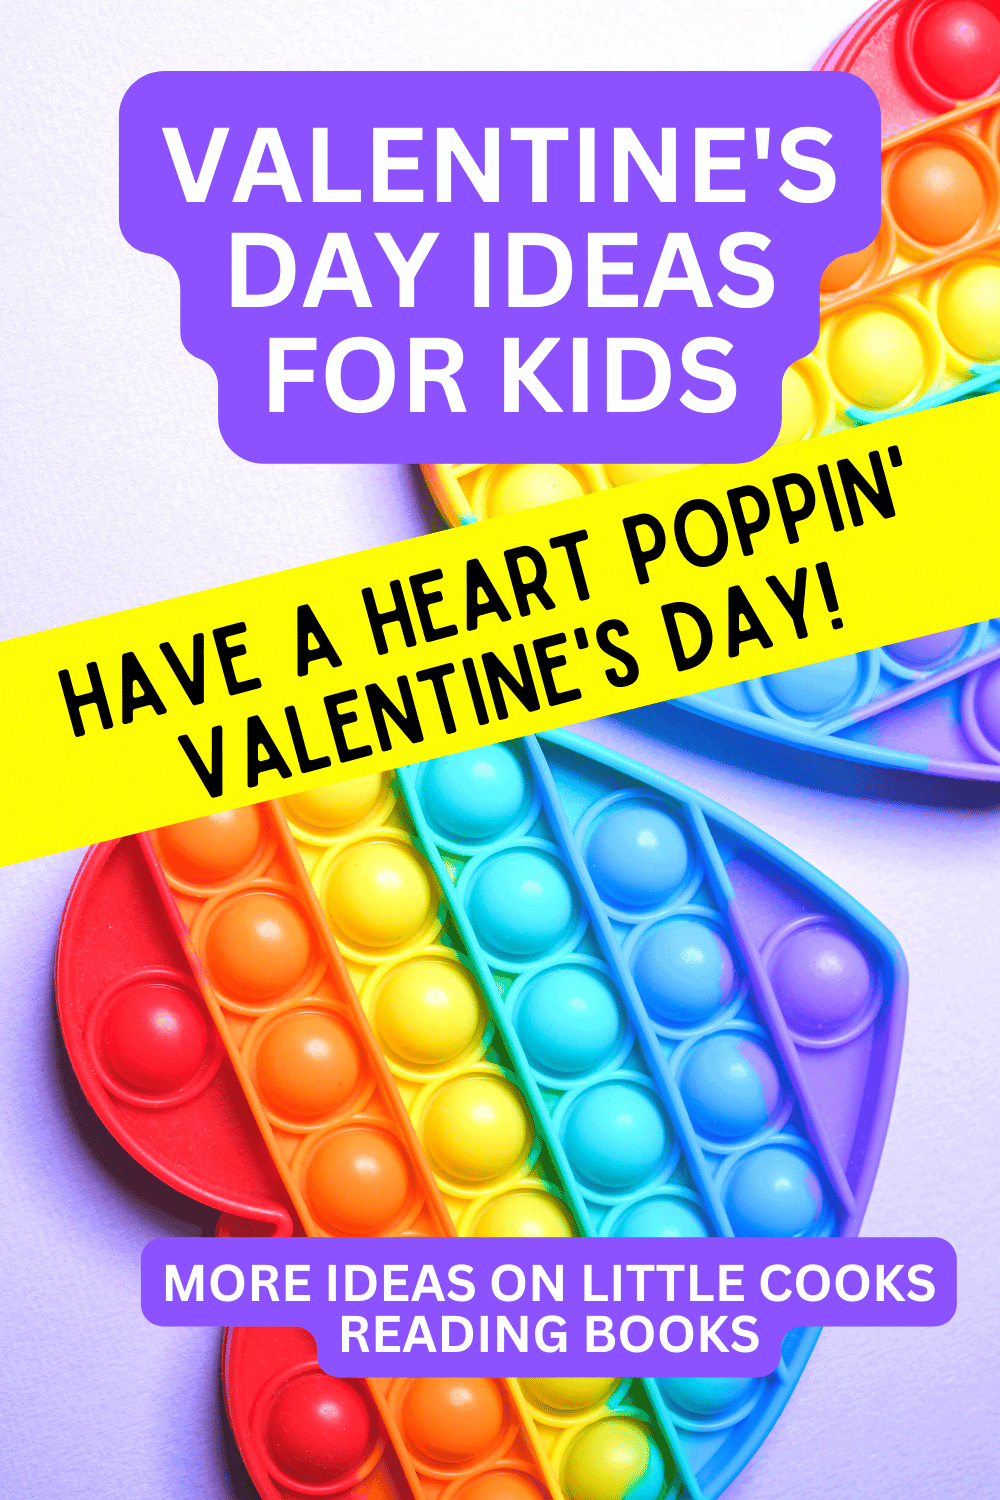 Valentines Cards Homemade Fidget Poppers Valentine DIY (Fun ideas for Valentine cards and gifts) heart shaped popper toys on a table with text overlay